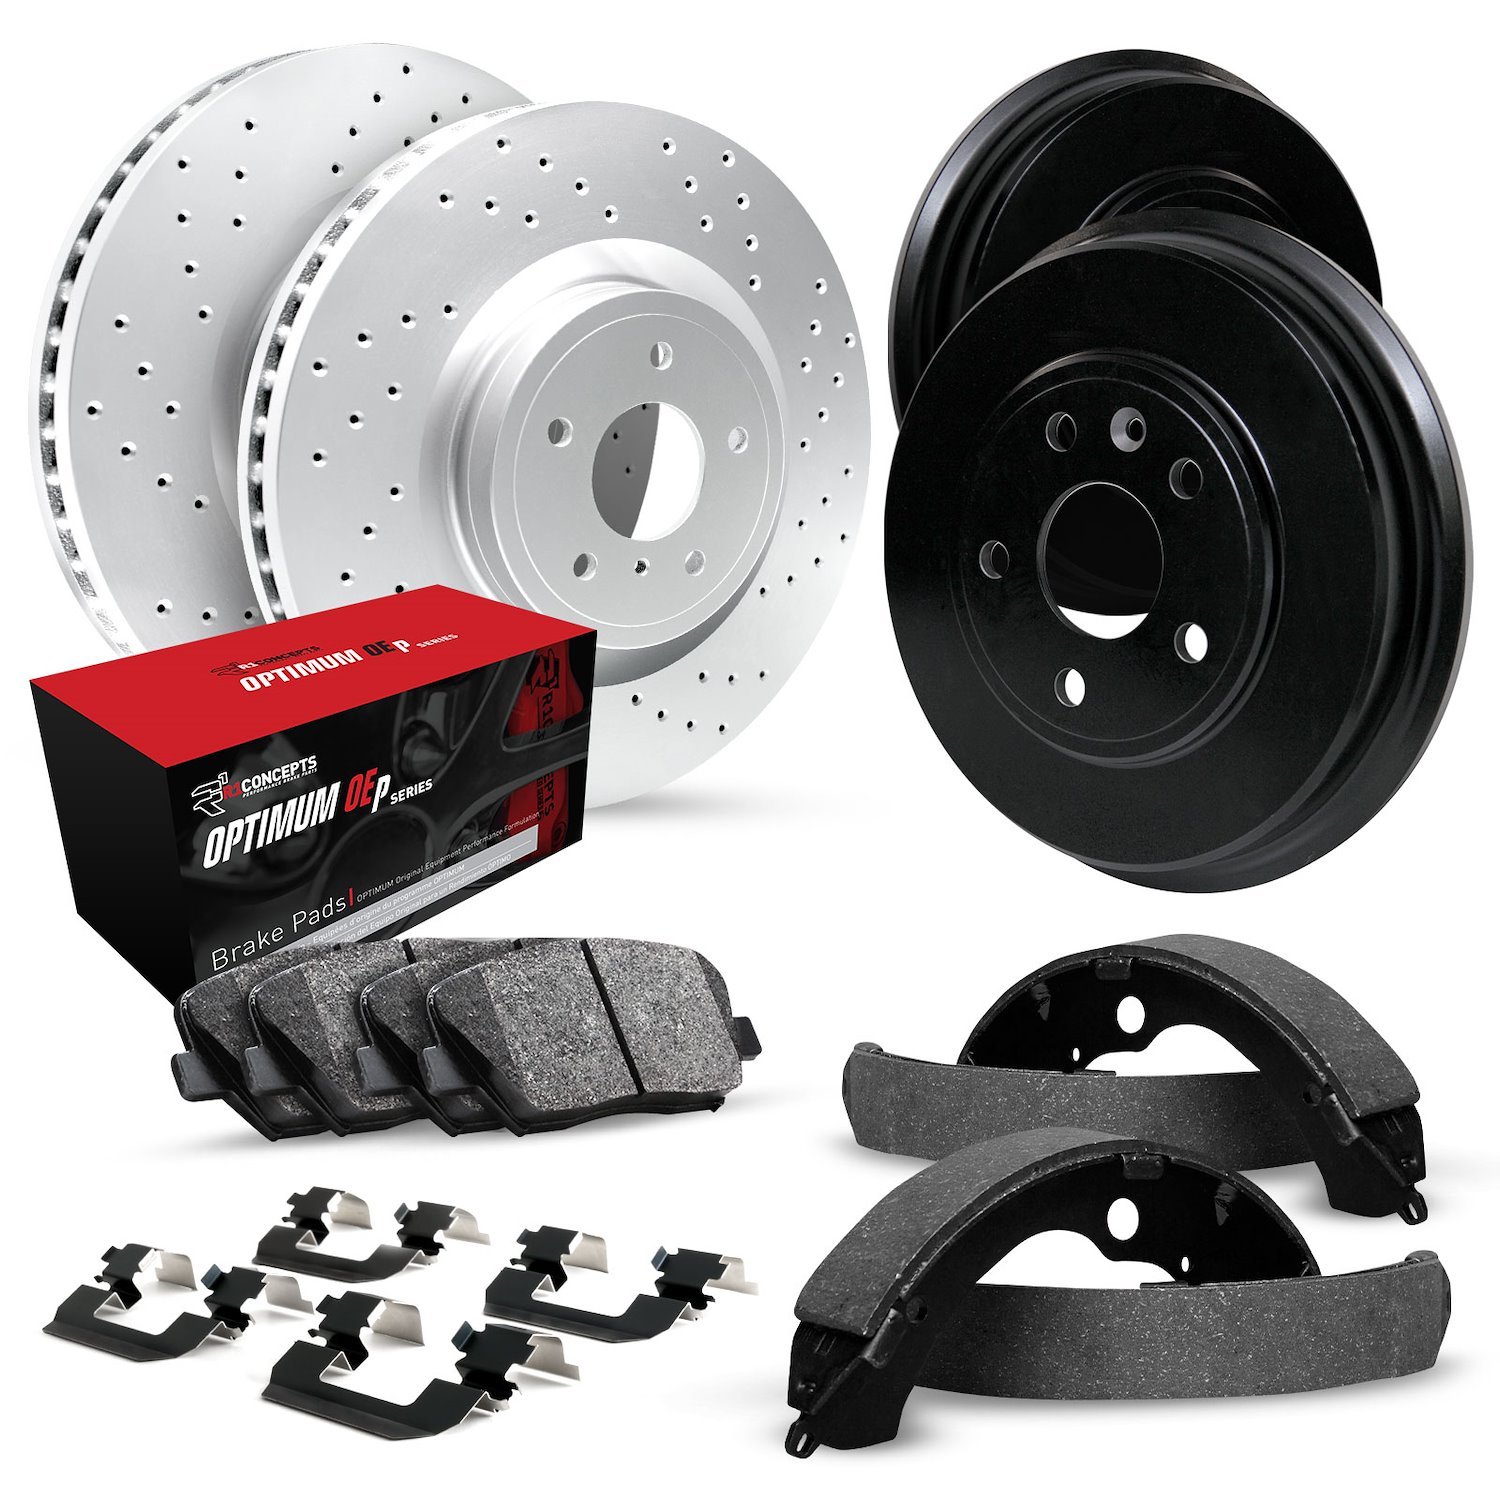 GEO-Carbon Drilled Brake Rotor & Drum Set w/Optimum OE Pads, Shoes, & Hardware, 1981-1991 GM, Position: Front & Rear